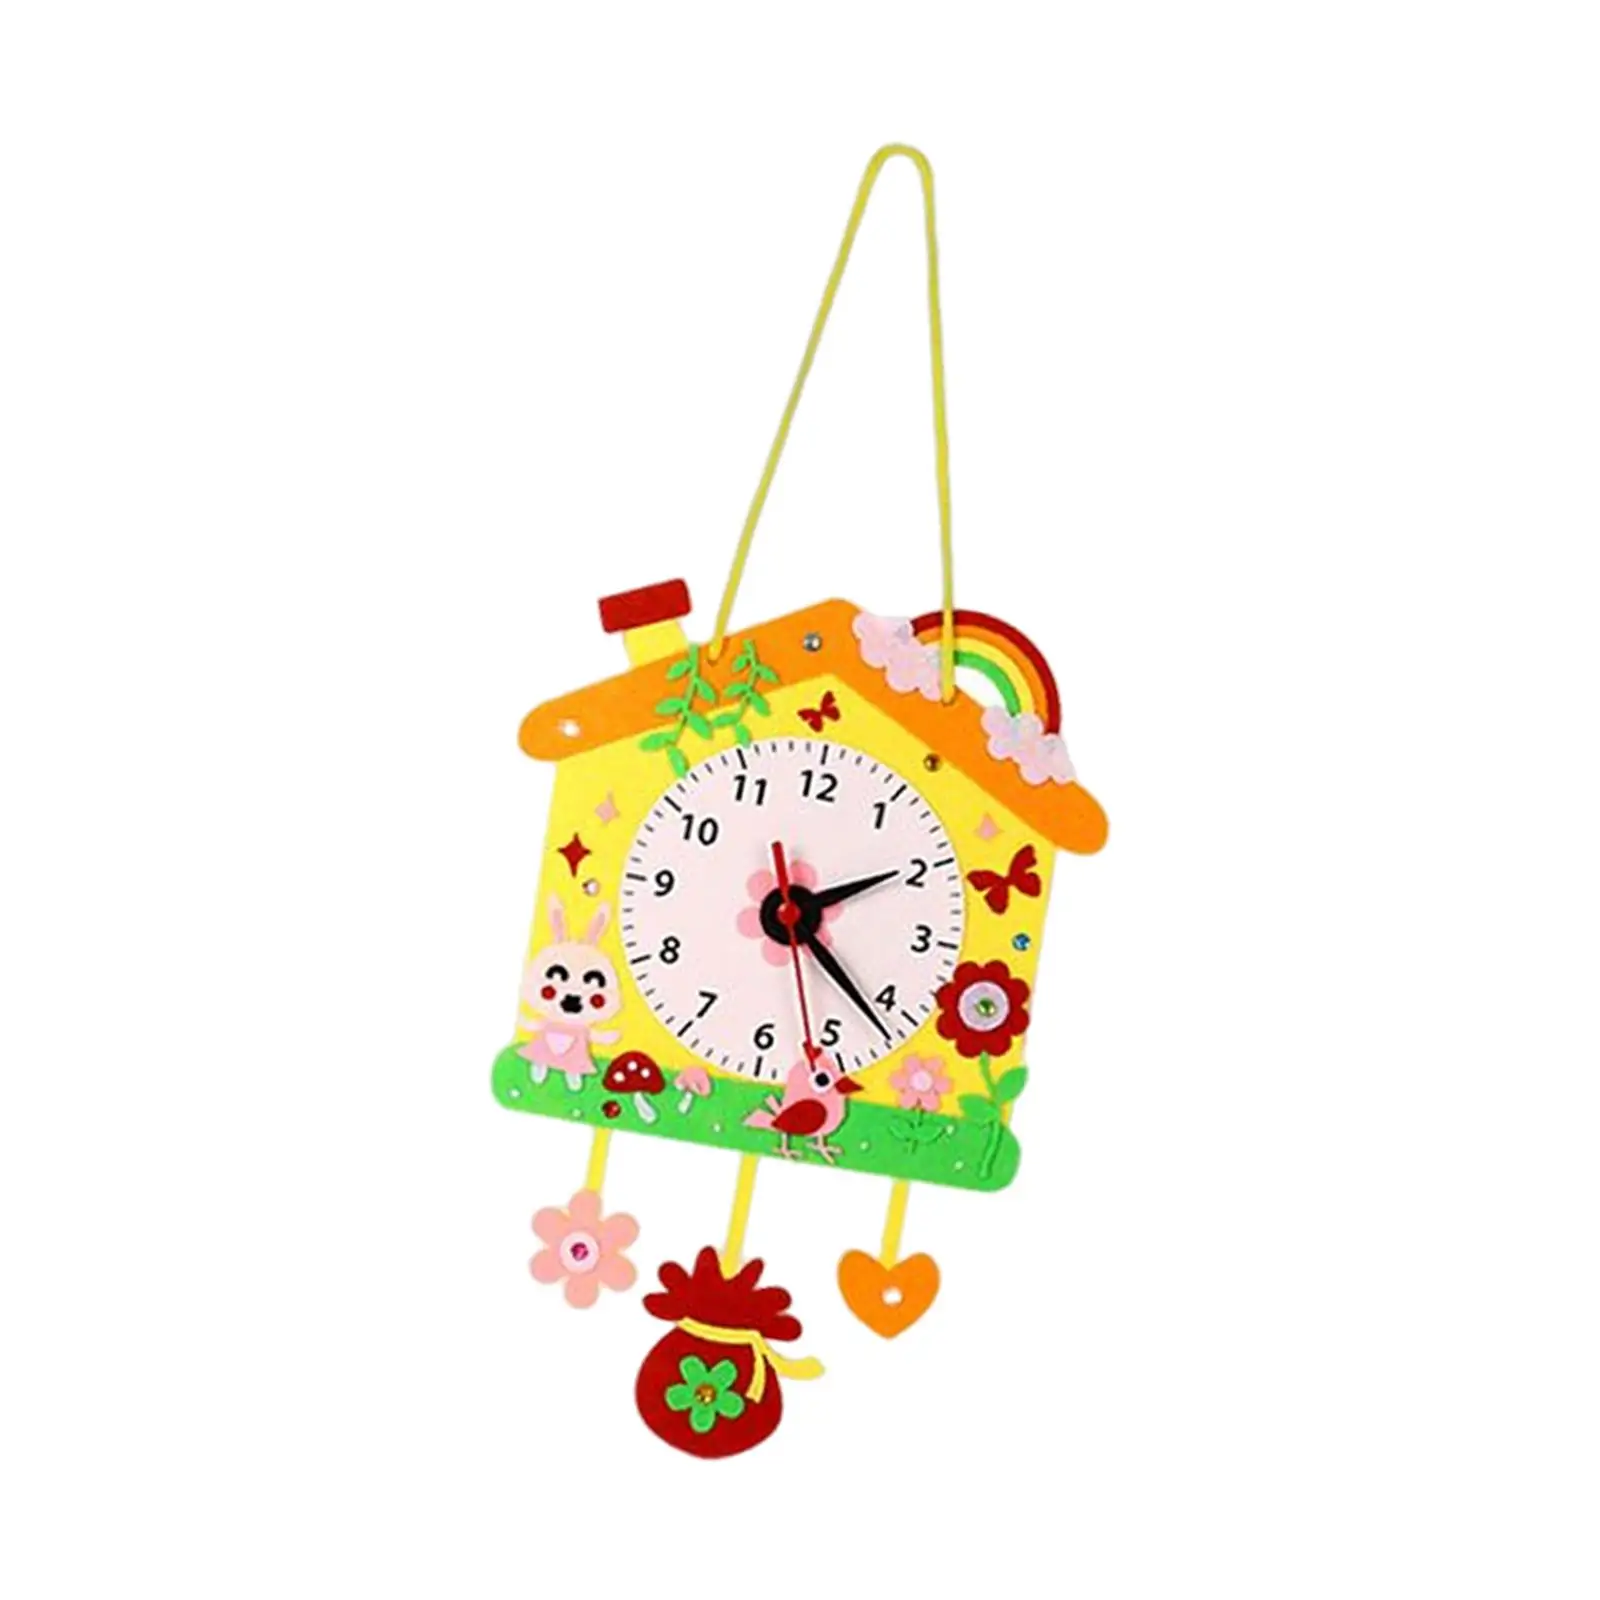 DIY Wall Clock Handmade Material Kit Montessori Educational Toys Crafts Time Cognition Time Clock for Toddlers Boys Decorations